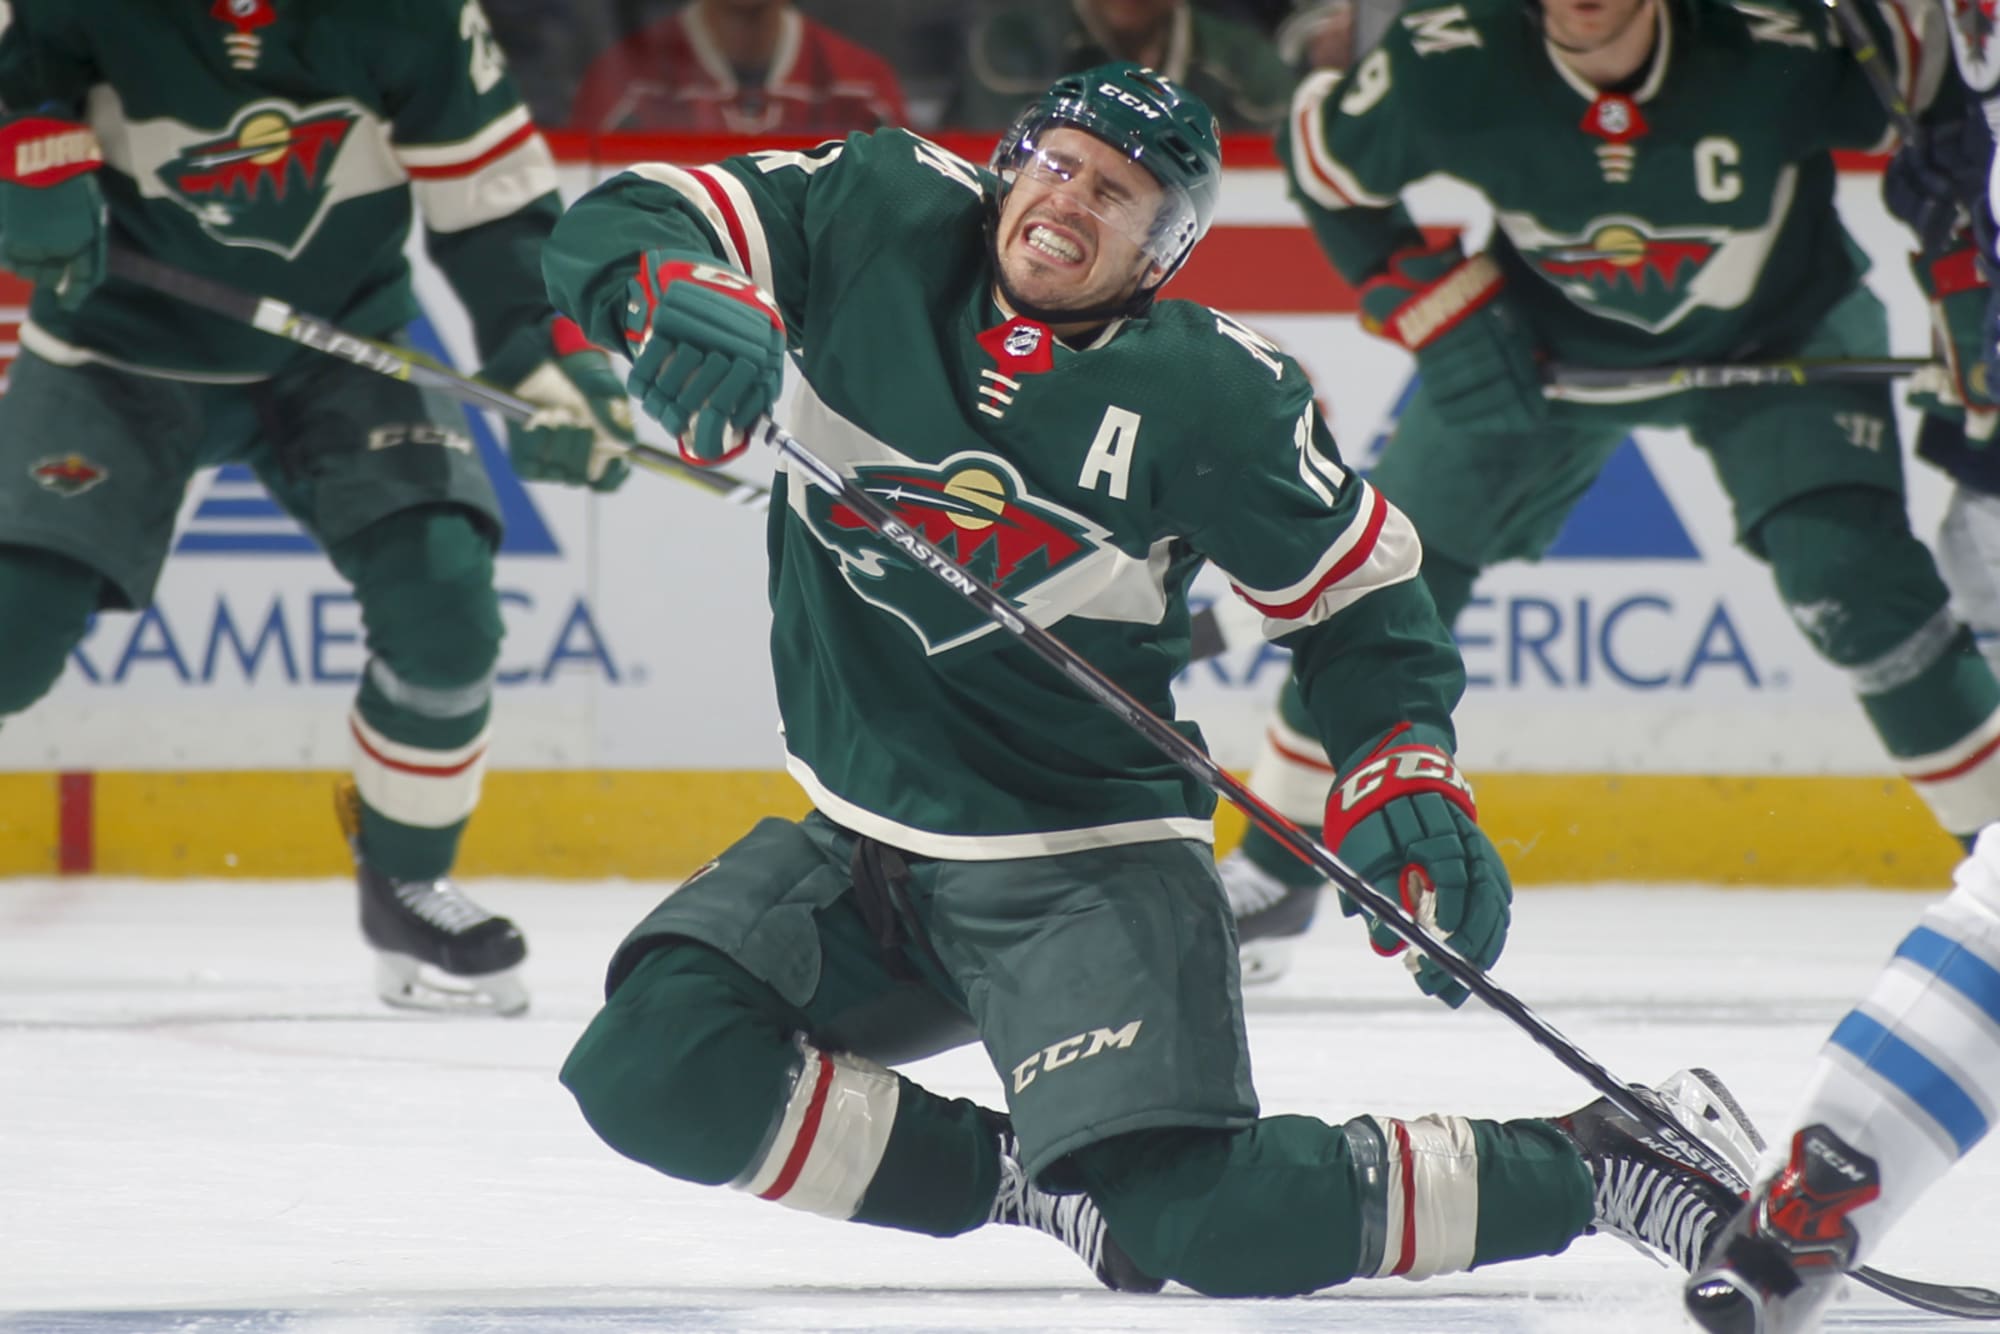 Minnesota Wild Playing style will inevitably lead to injuries